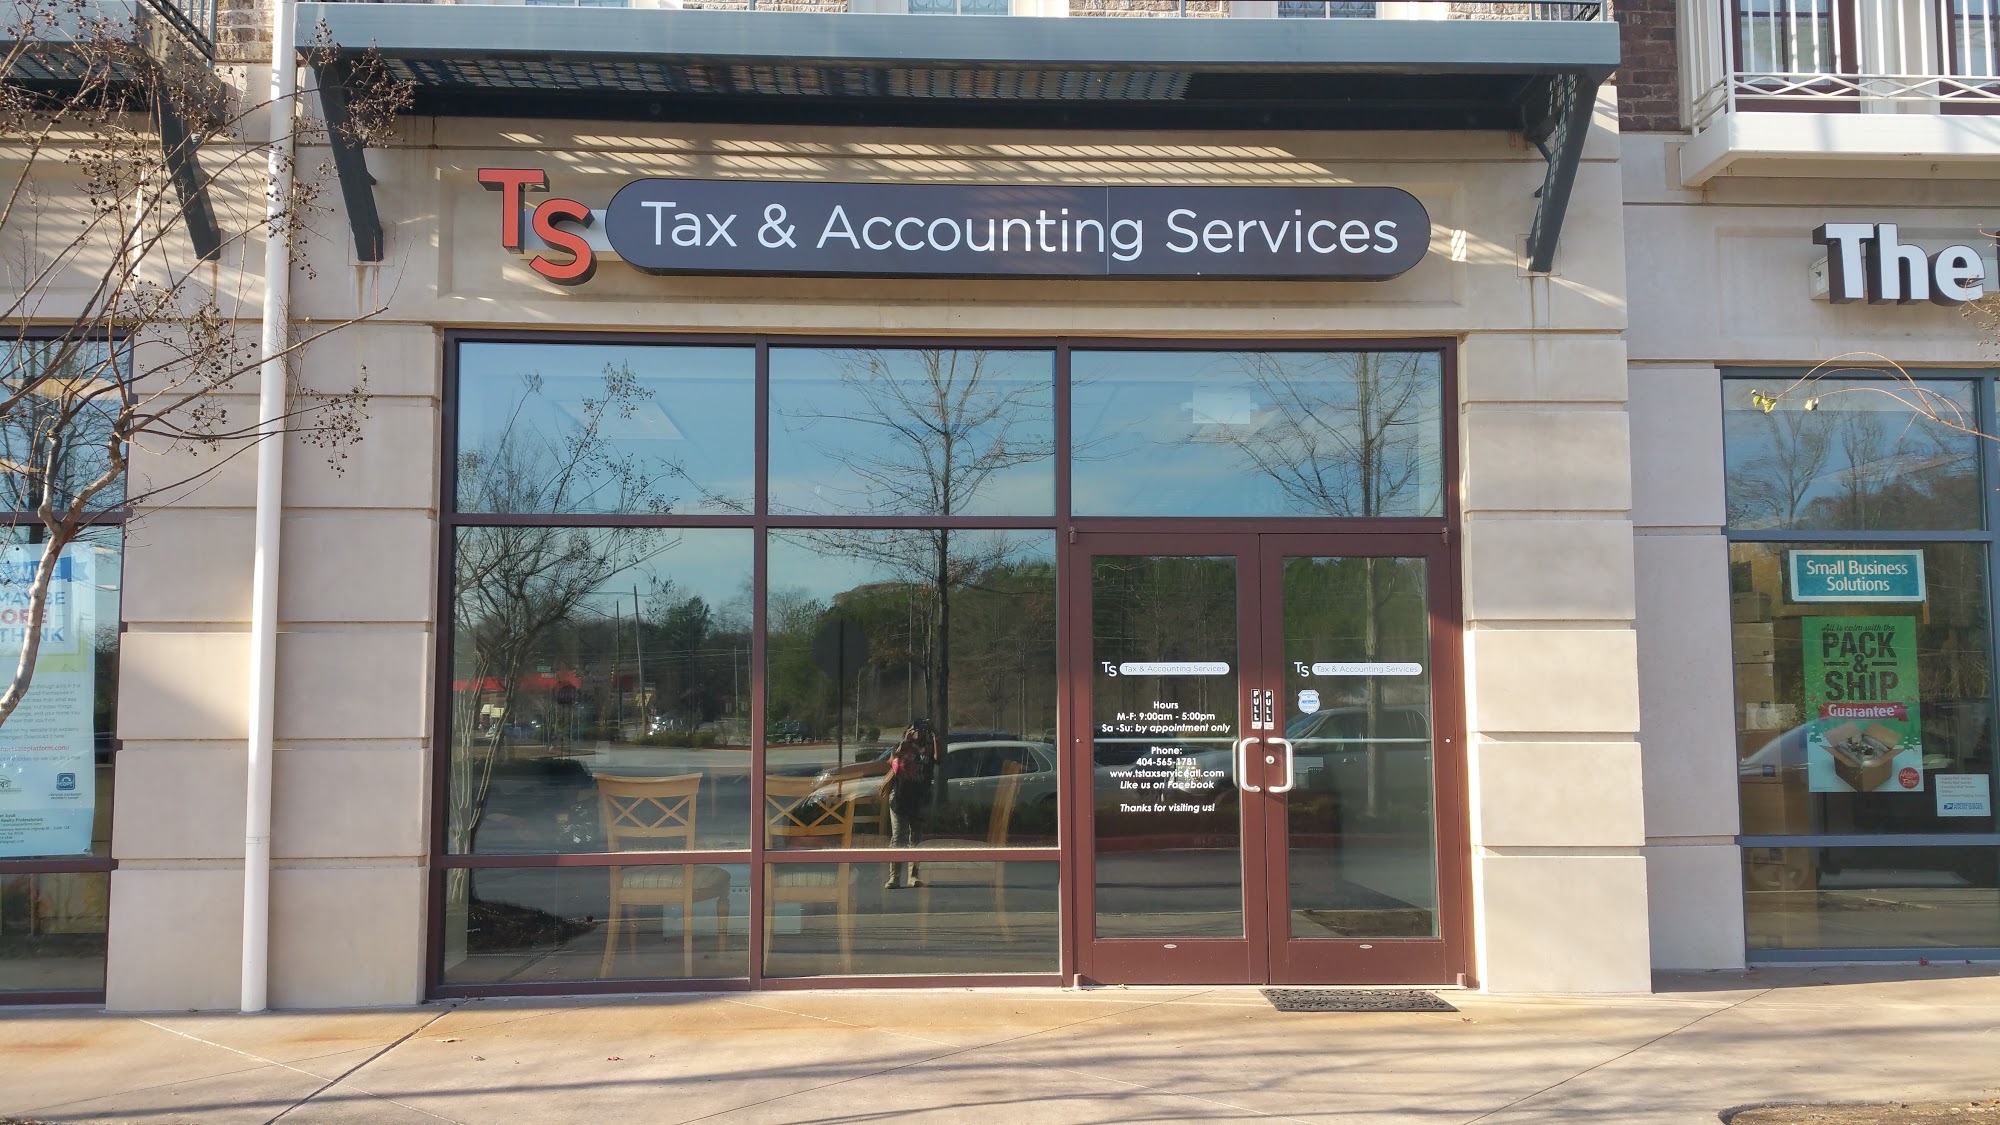 TS Tax & Accounting Services